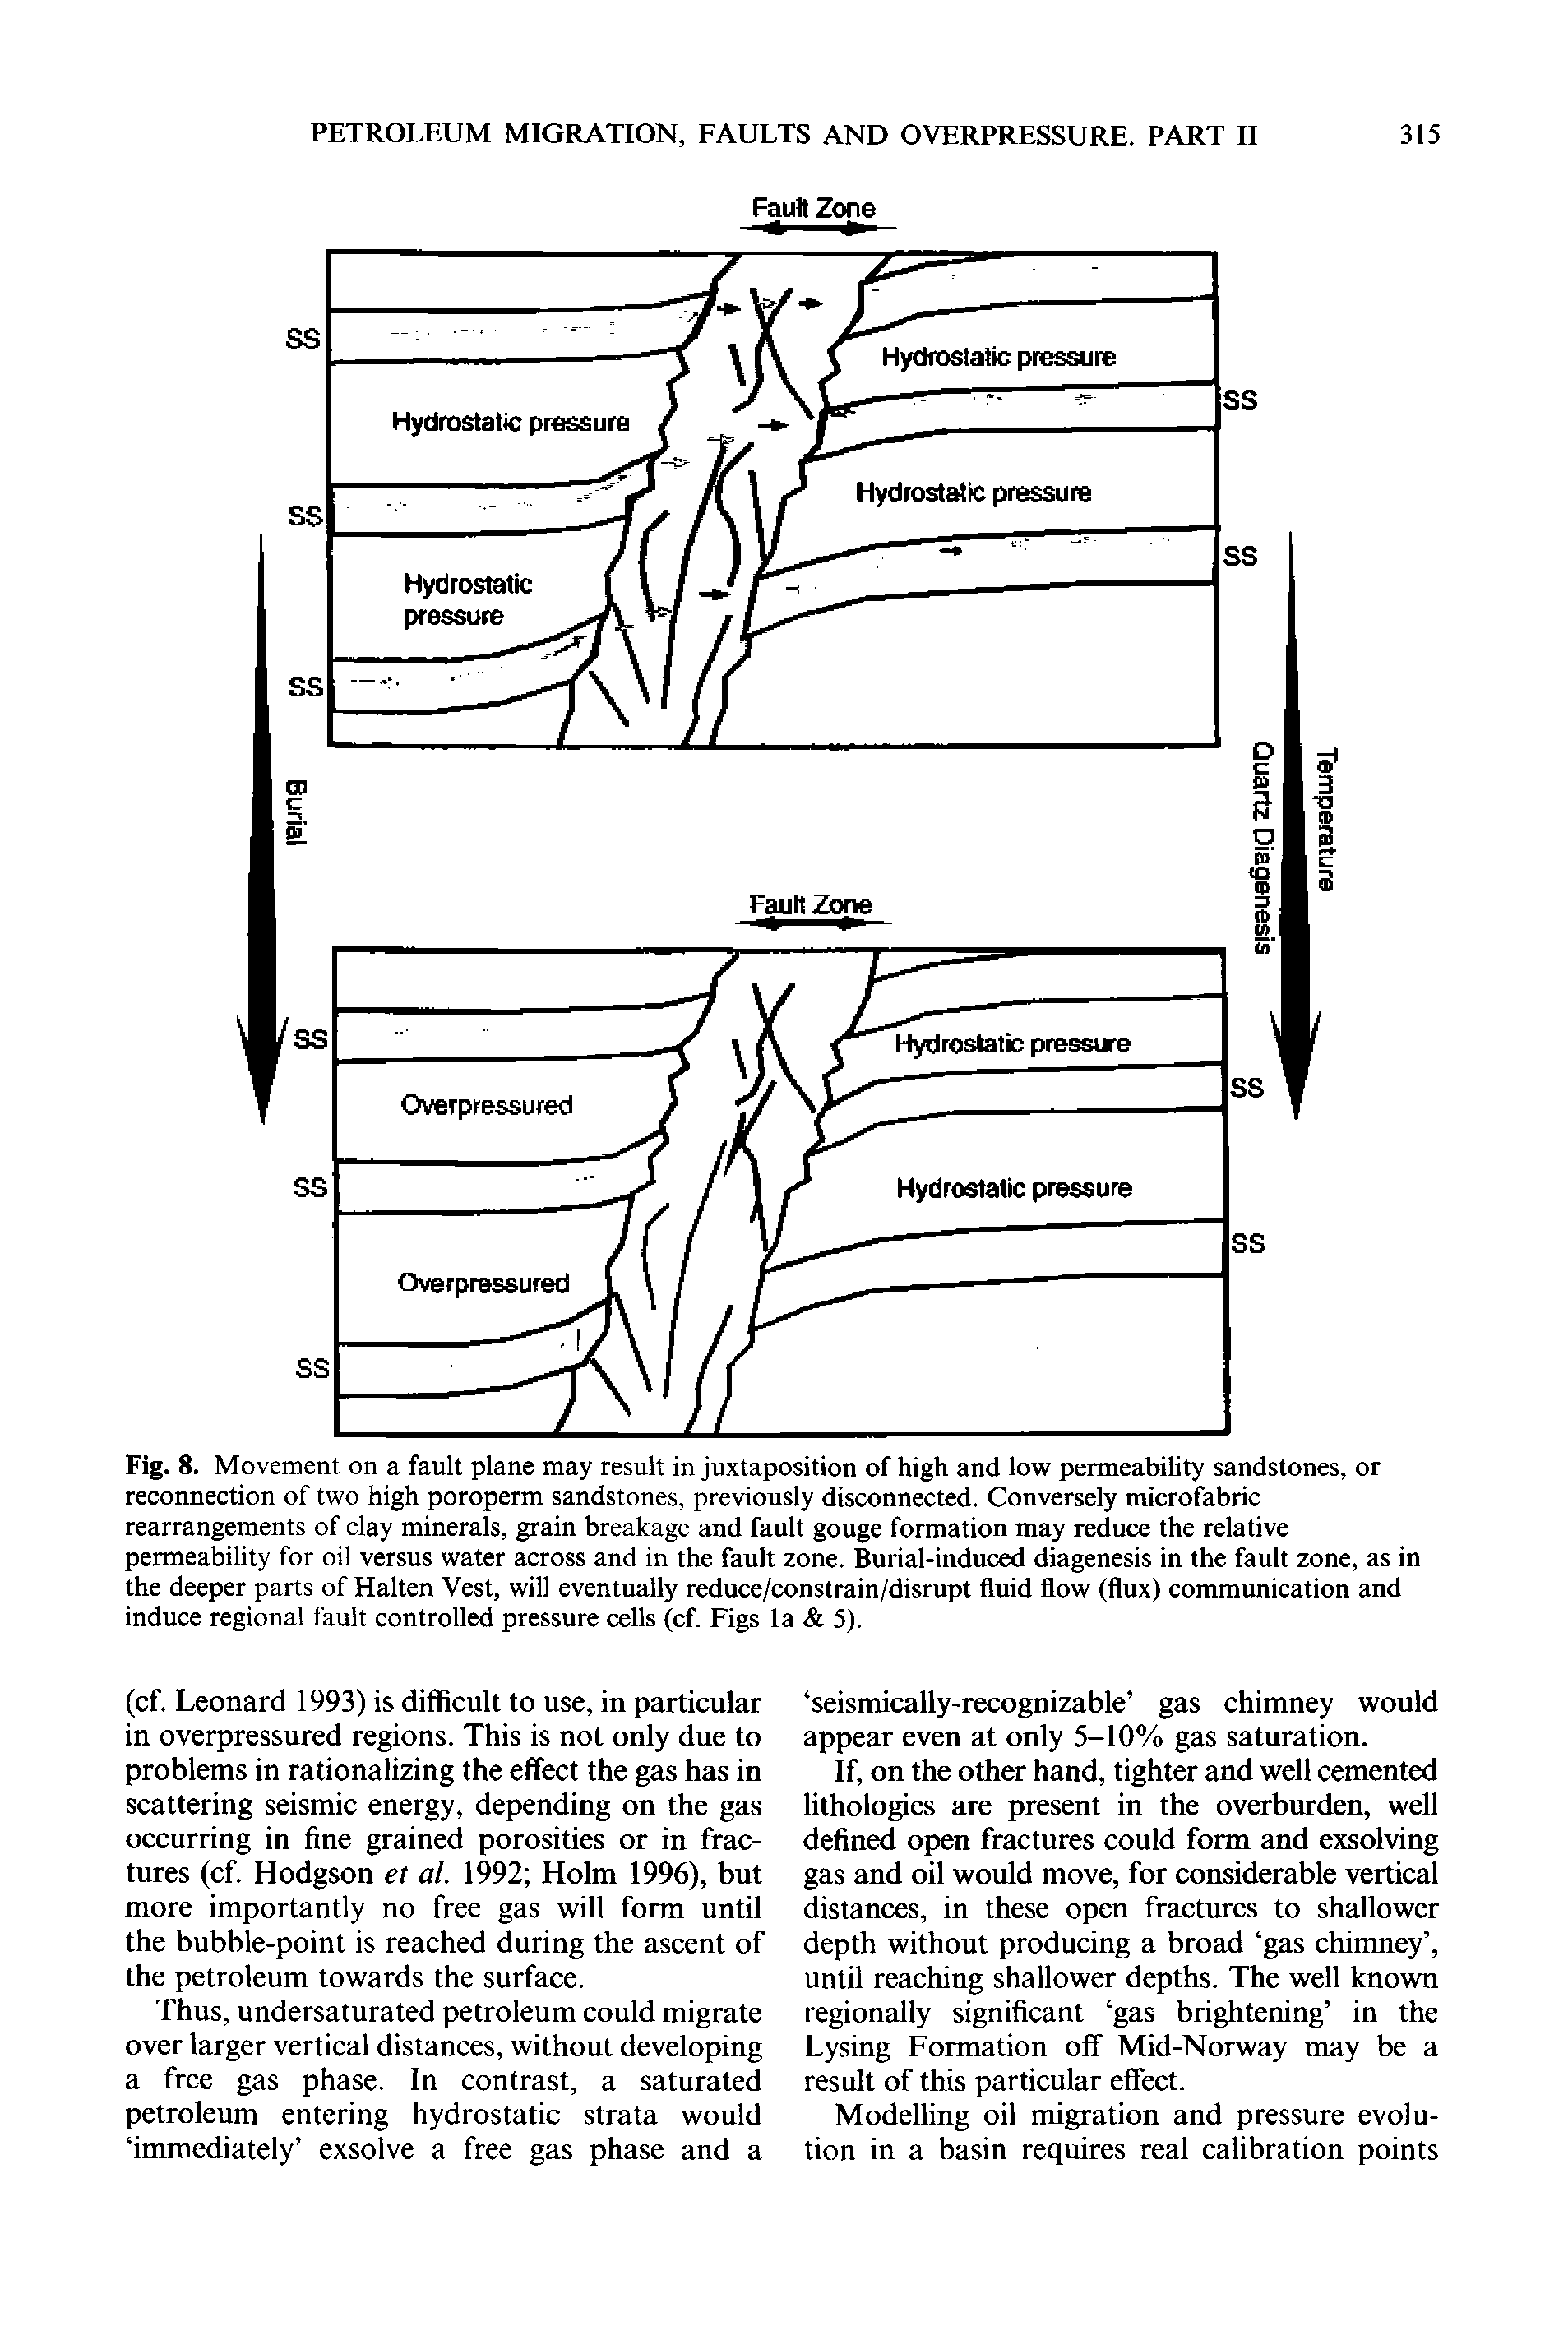 Fig. 8. Movement on a fault plane may result in juxtaposition of high and low permeability sandstones, or reconnection of two high poroperm sandstones, previously disconnected. Conversely microfabric rearrangements of clay minerals, grain breakage and fault gouge formation may reduce the relative permeability for oil versus water across and in the fault zone. Burial-induced diagenesis in the fault zone, as in the deeper parts of Halten Vest, will eventually reduce/constrain/disrupt fluid flow (flux) communication and induce regional fault controlled pressure cells (cf. Figs la 5).